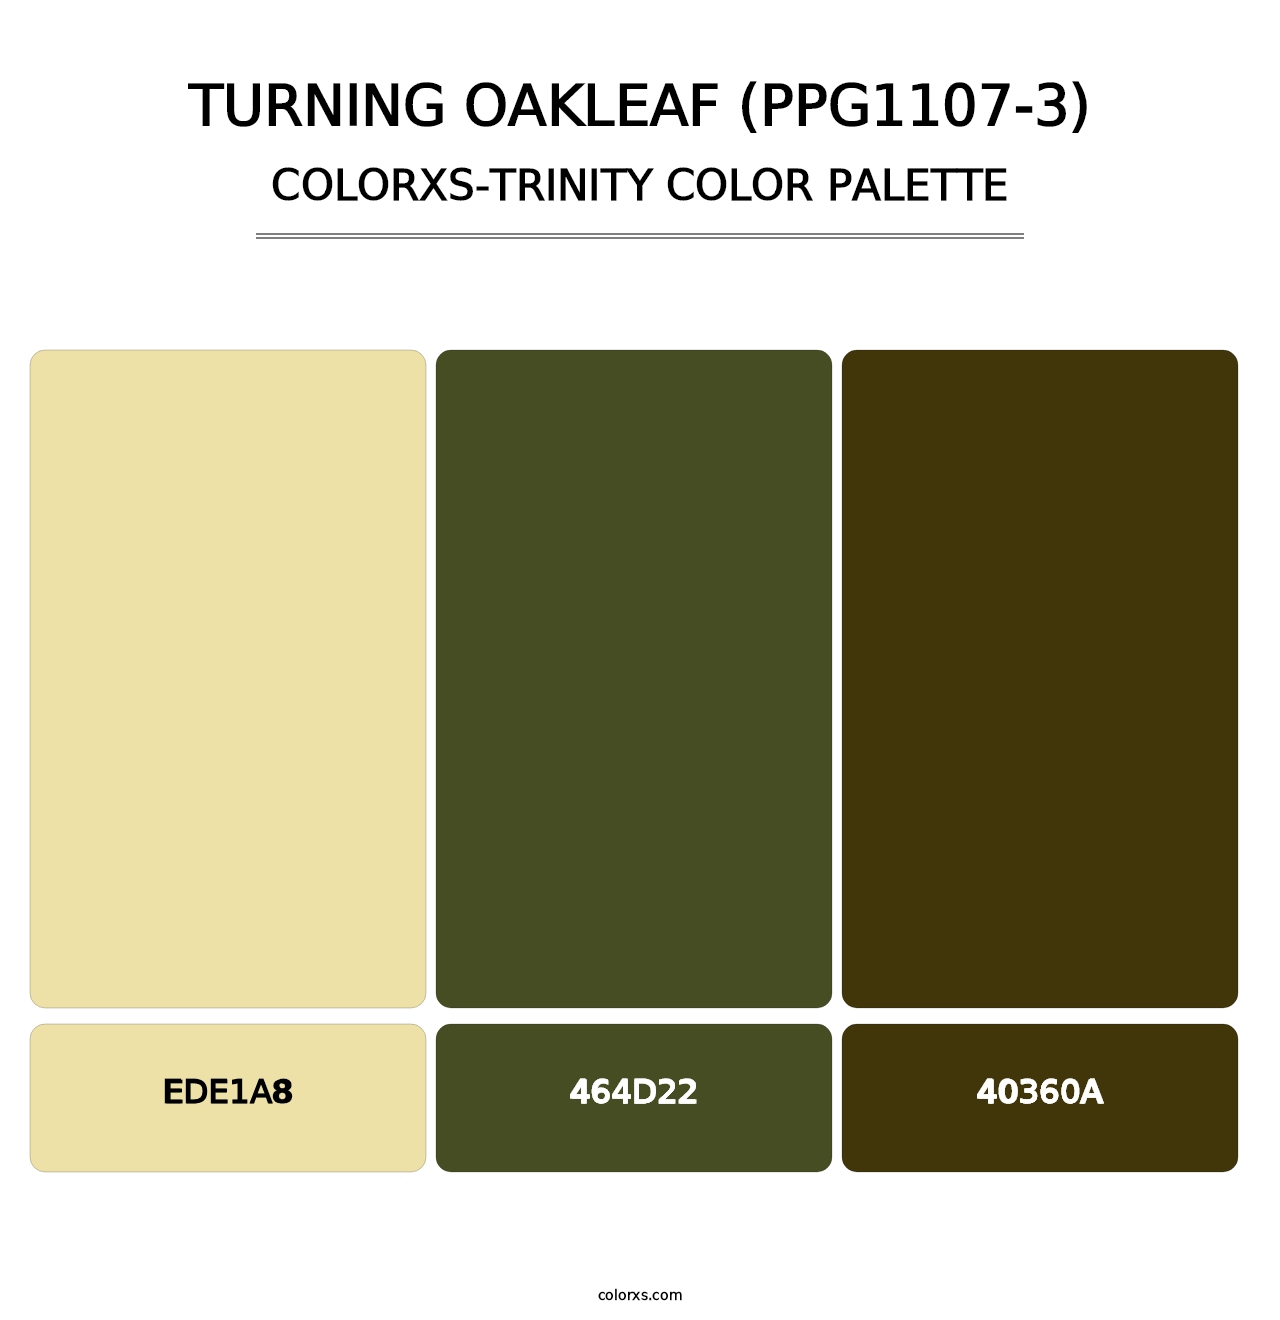 Turning Oakleaf (PPG1107-3) - Colorxs Trinity Palette